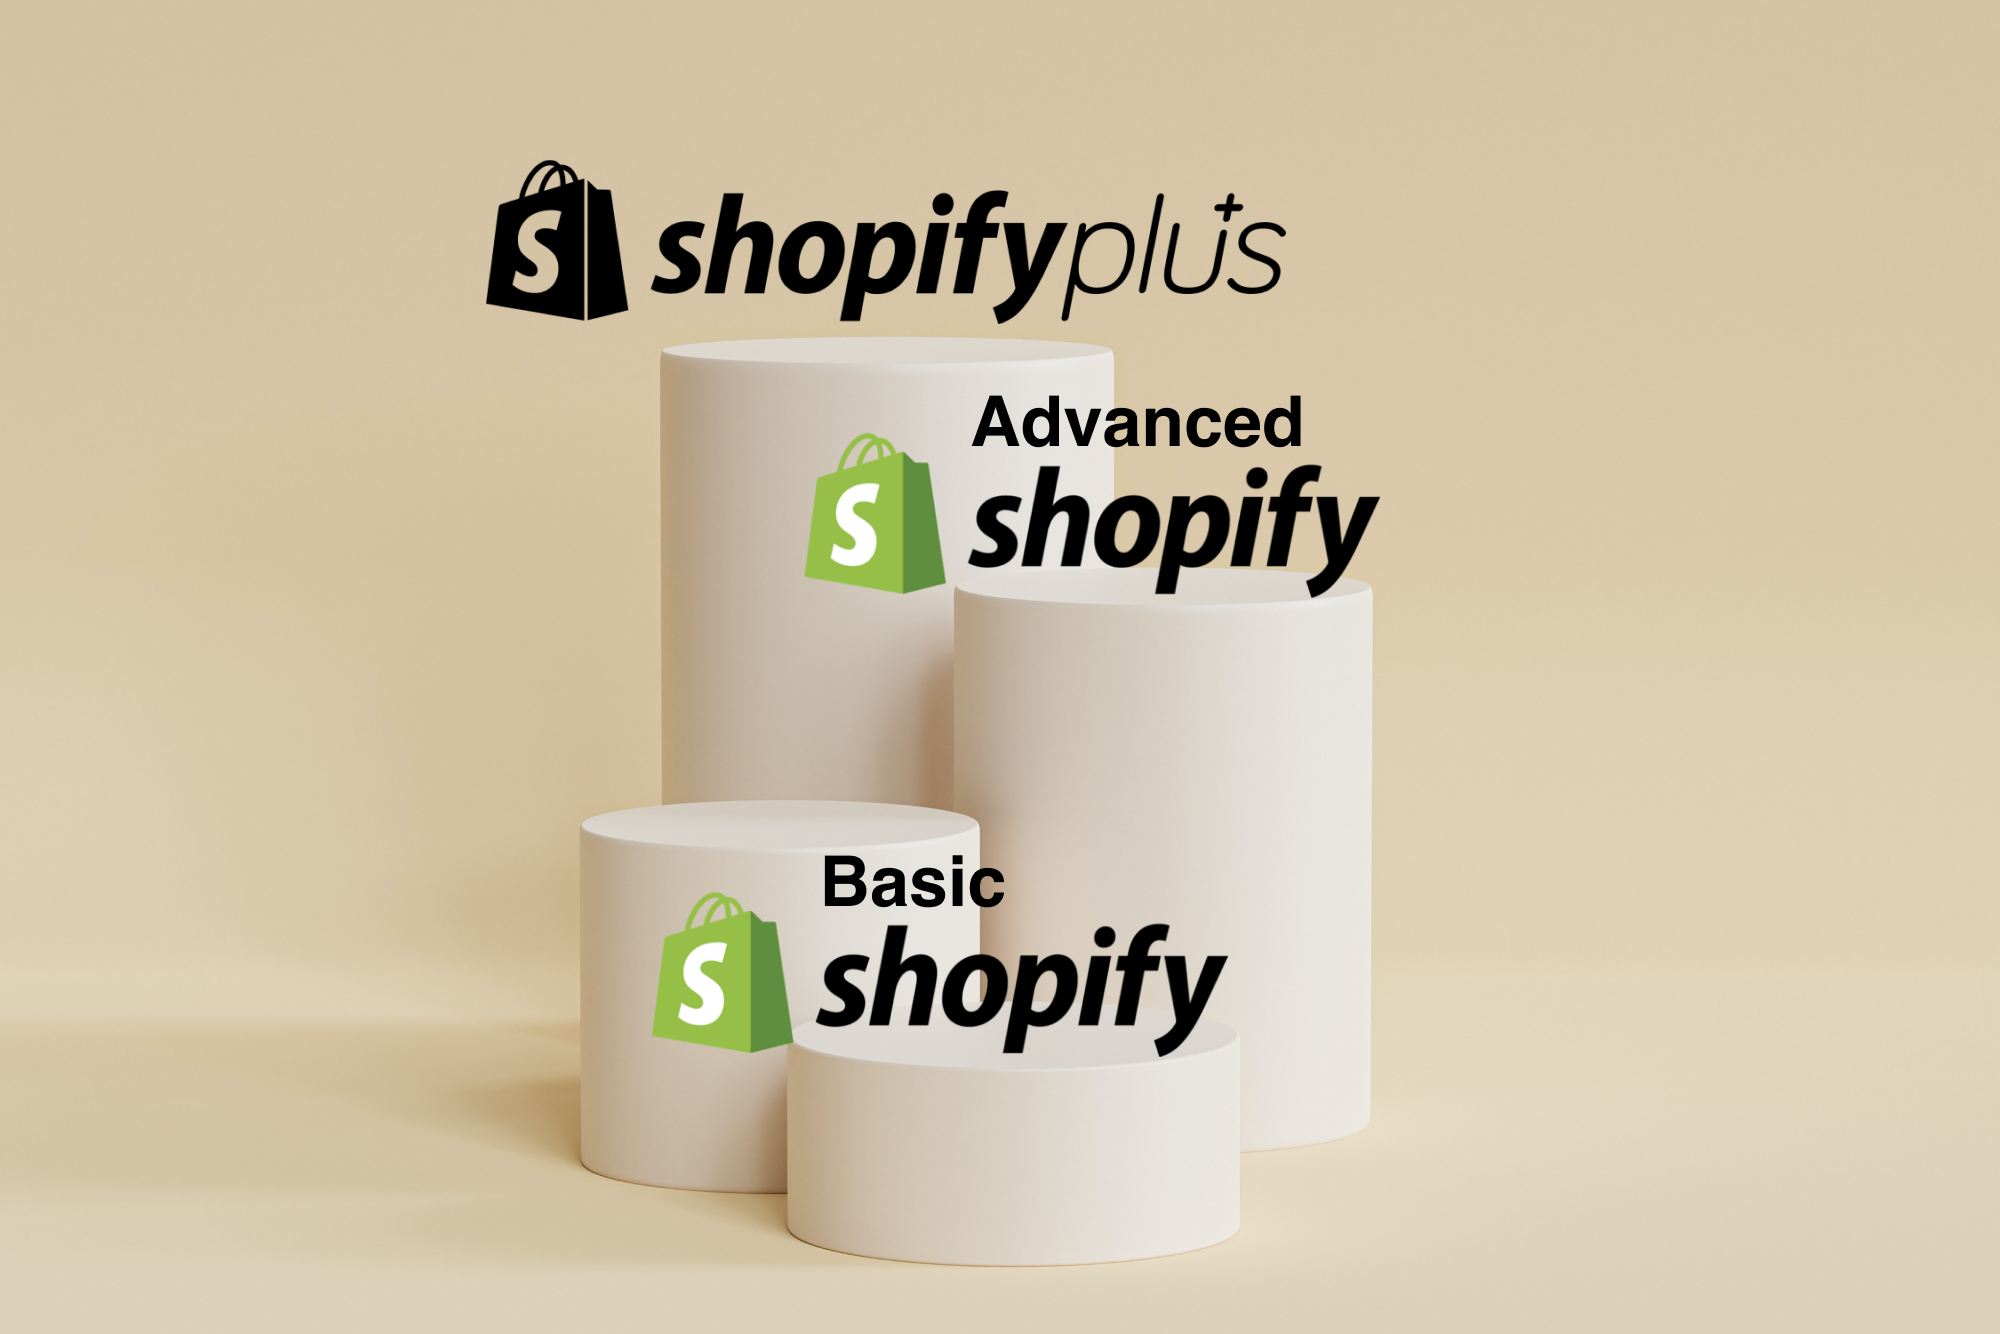 Shopify Basics, Advanced, Plus: how do you choose between Shopify versions?